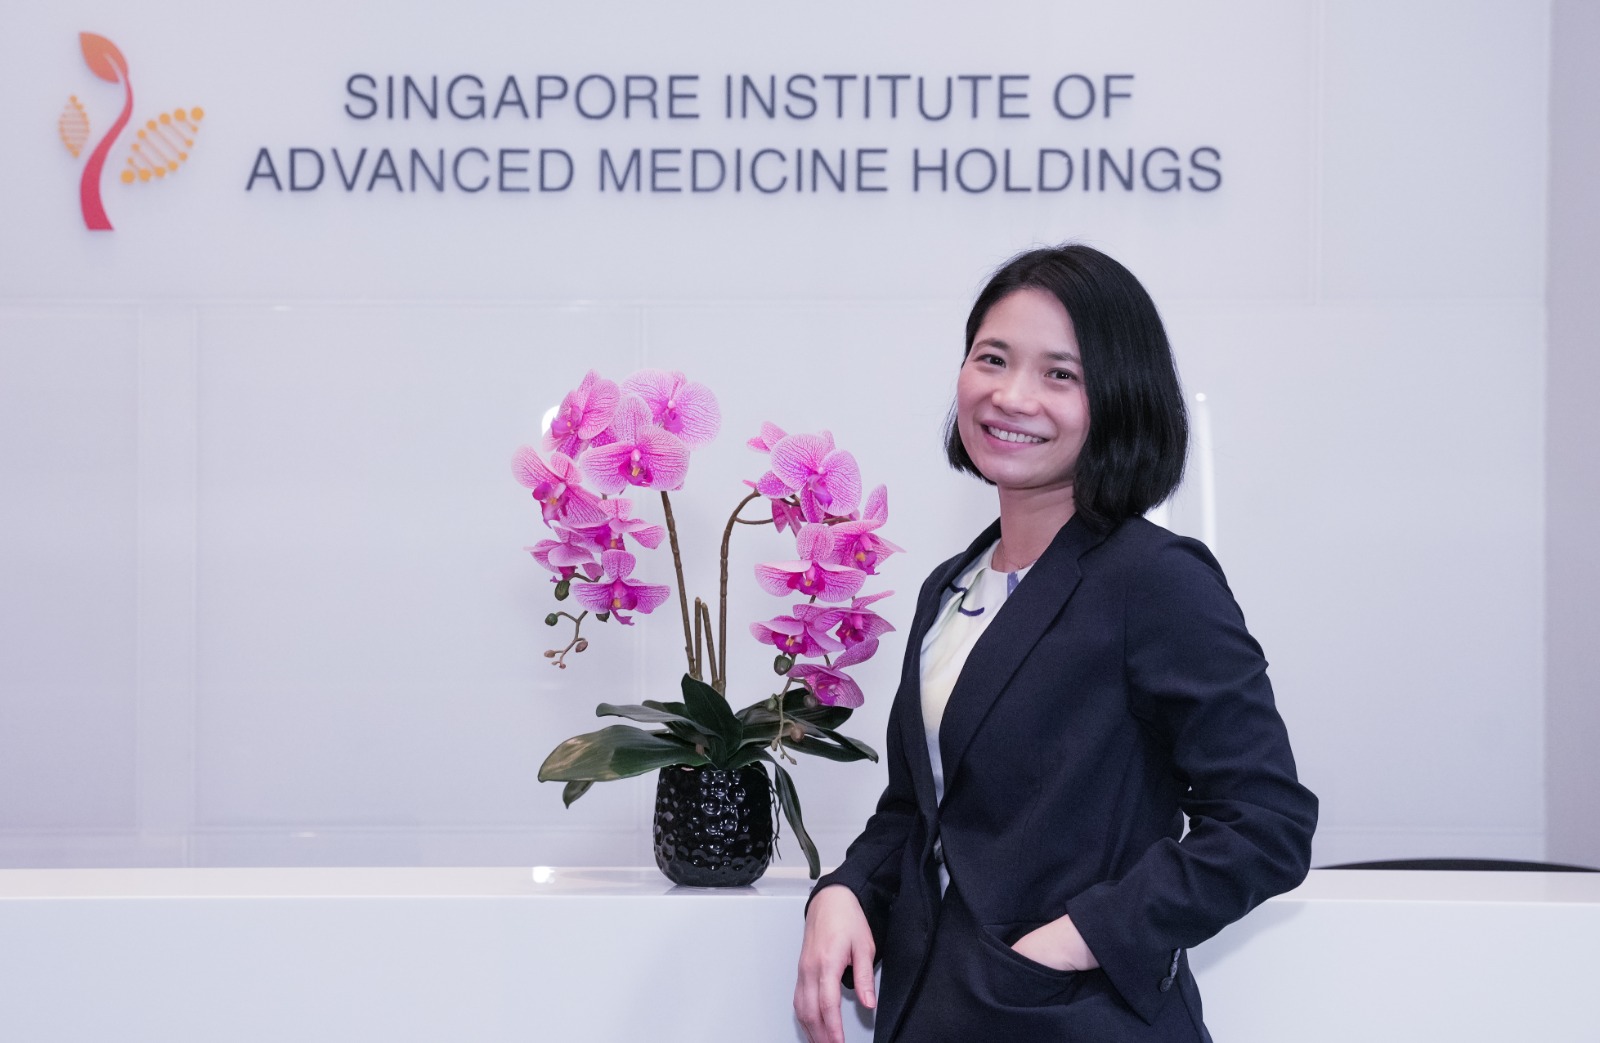 Dr Wong Ru Xin is a radiation oncologist at Proton Therapy SG